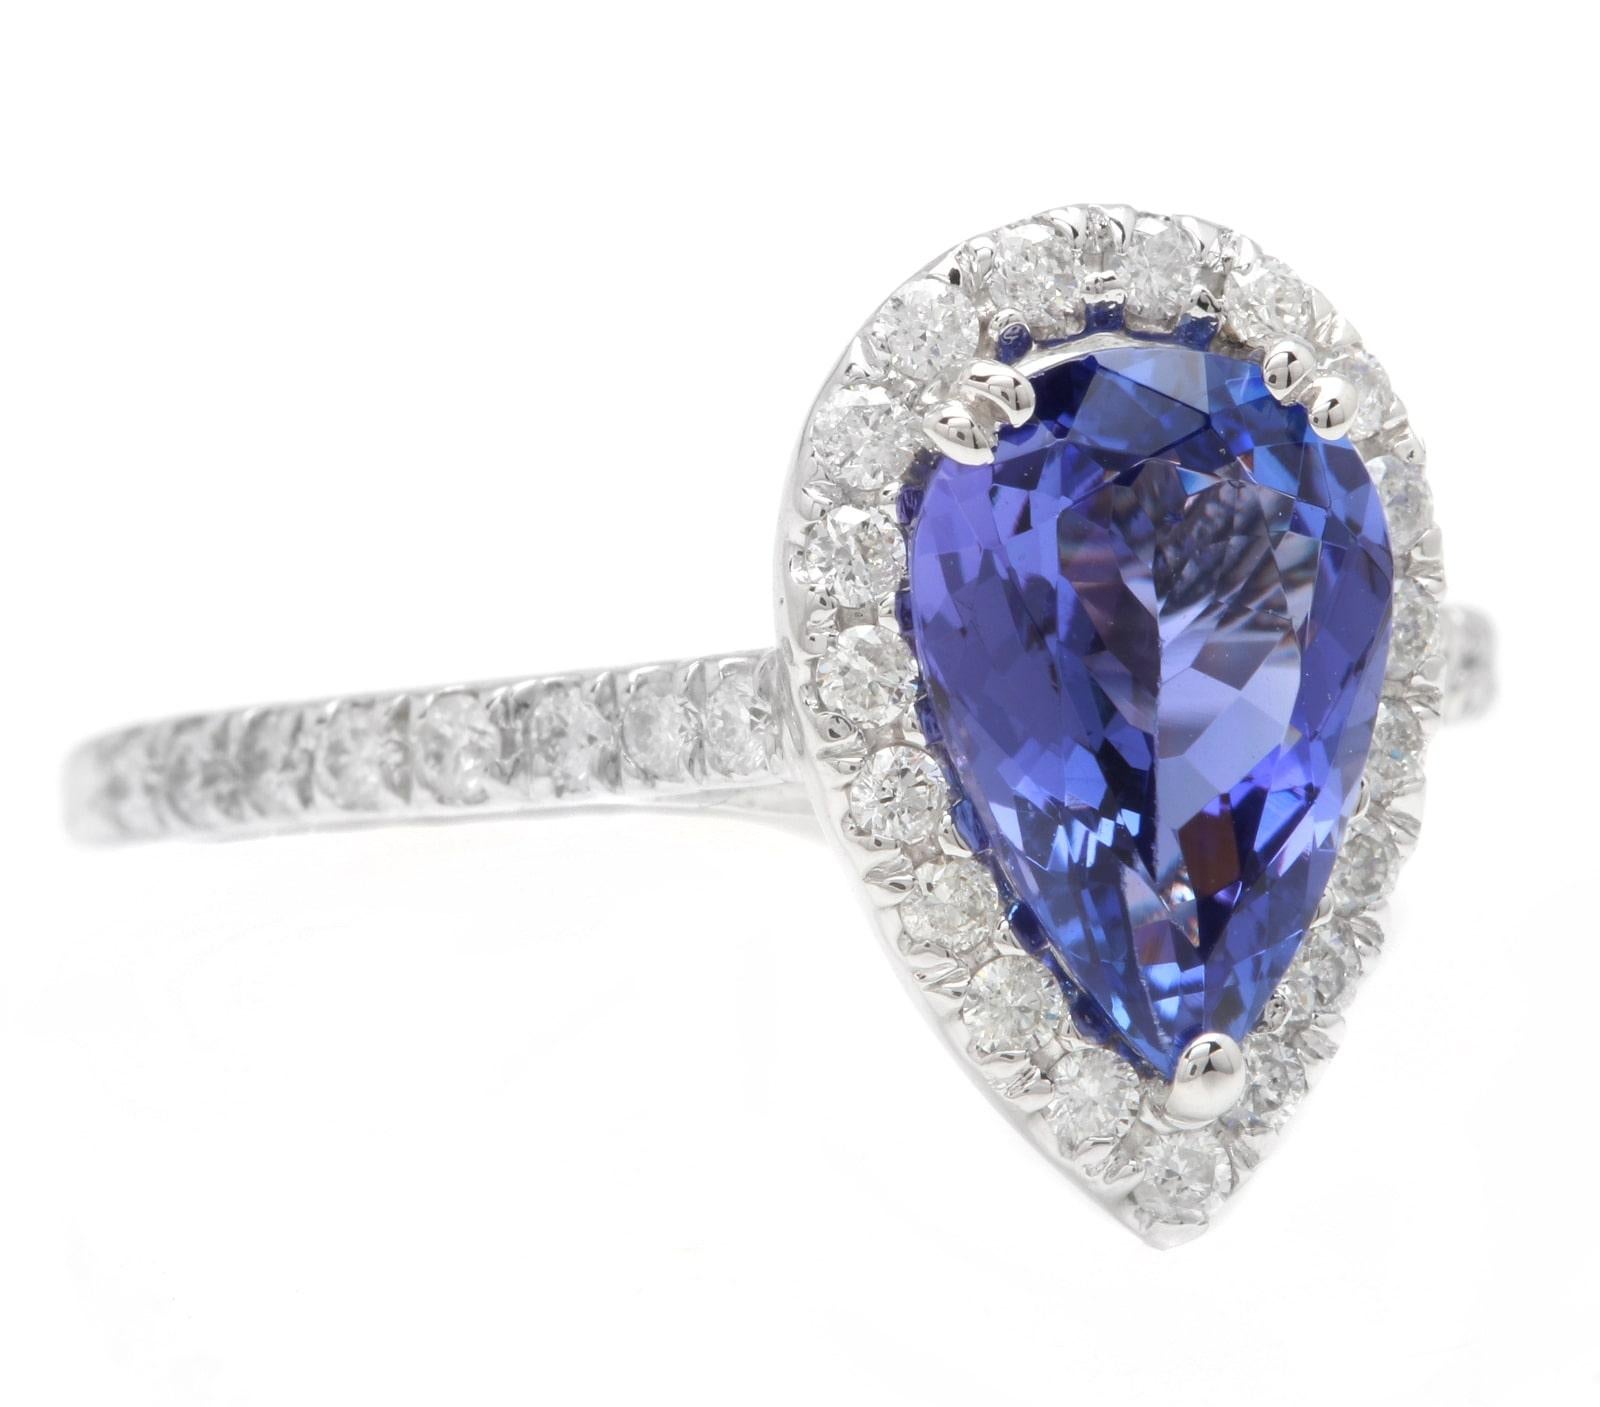 2.90 Carats Natural Very Nice Looking Tanzanite and Diamond 14K Solid White Gold Ring

Suggested Replacement Value:  $5,800.00

Total Natural Pear Shaped Tanzanite Weight is: Approx. 2.50 Carats 

Tanzanite Measures: Approx. 10.50 x 7.00mm
 
Natural